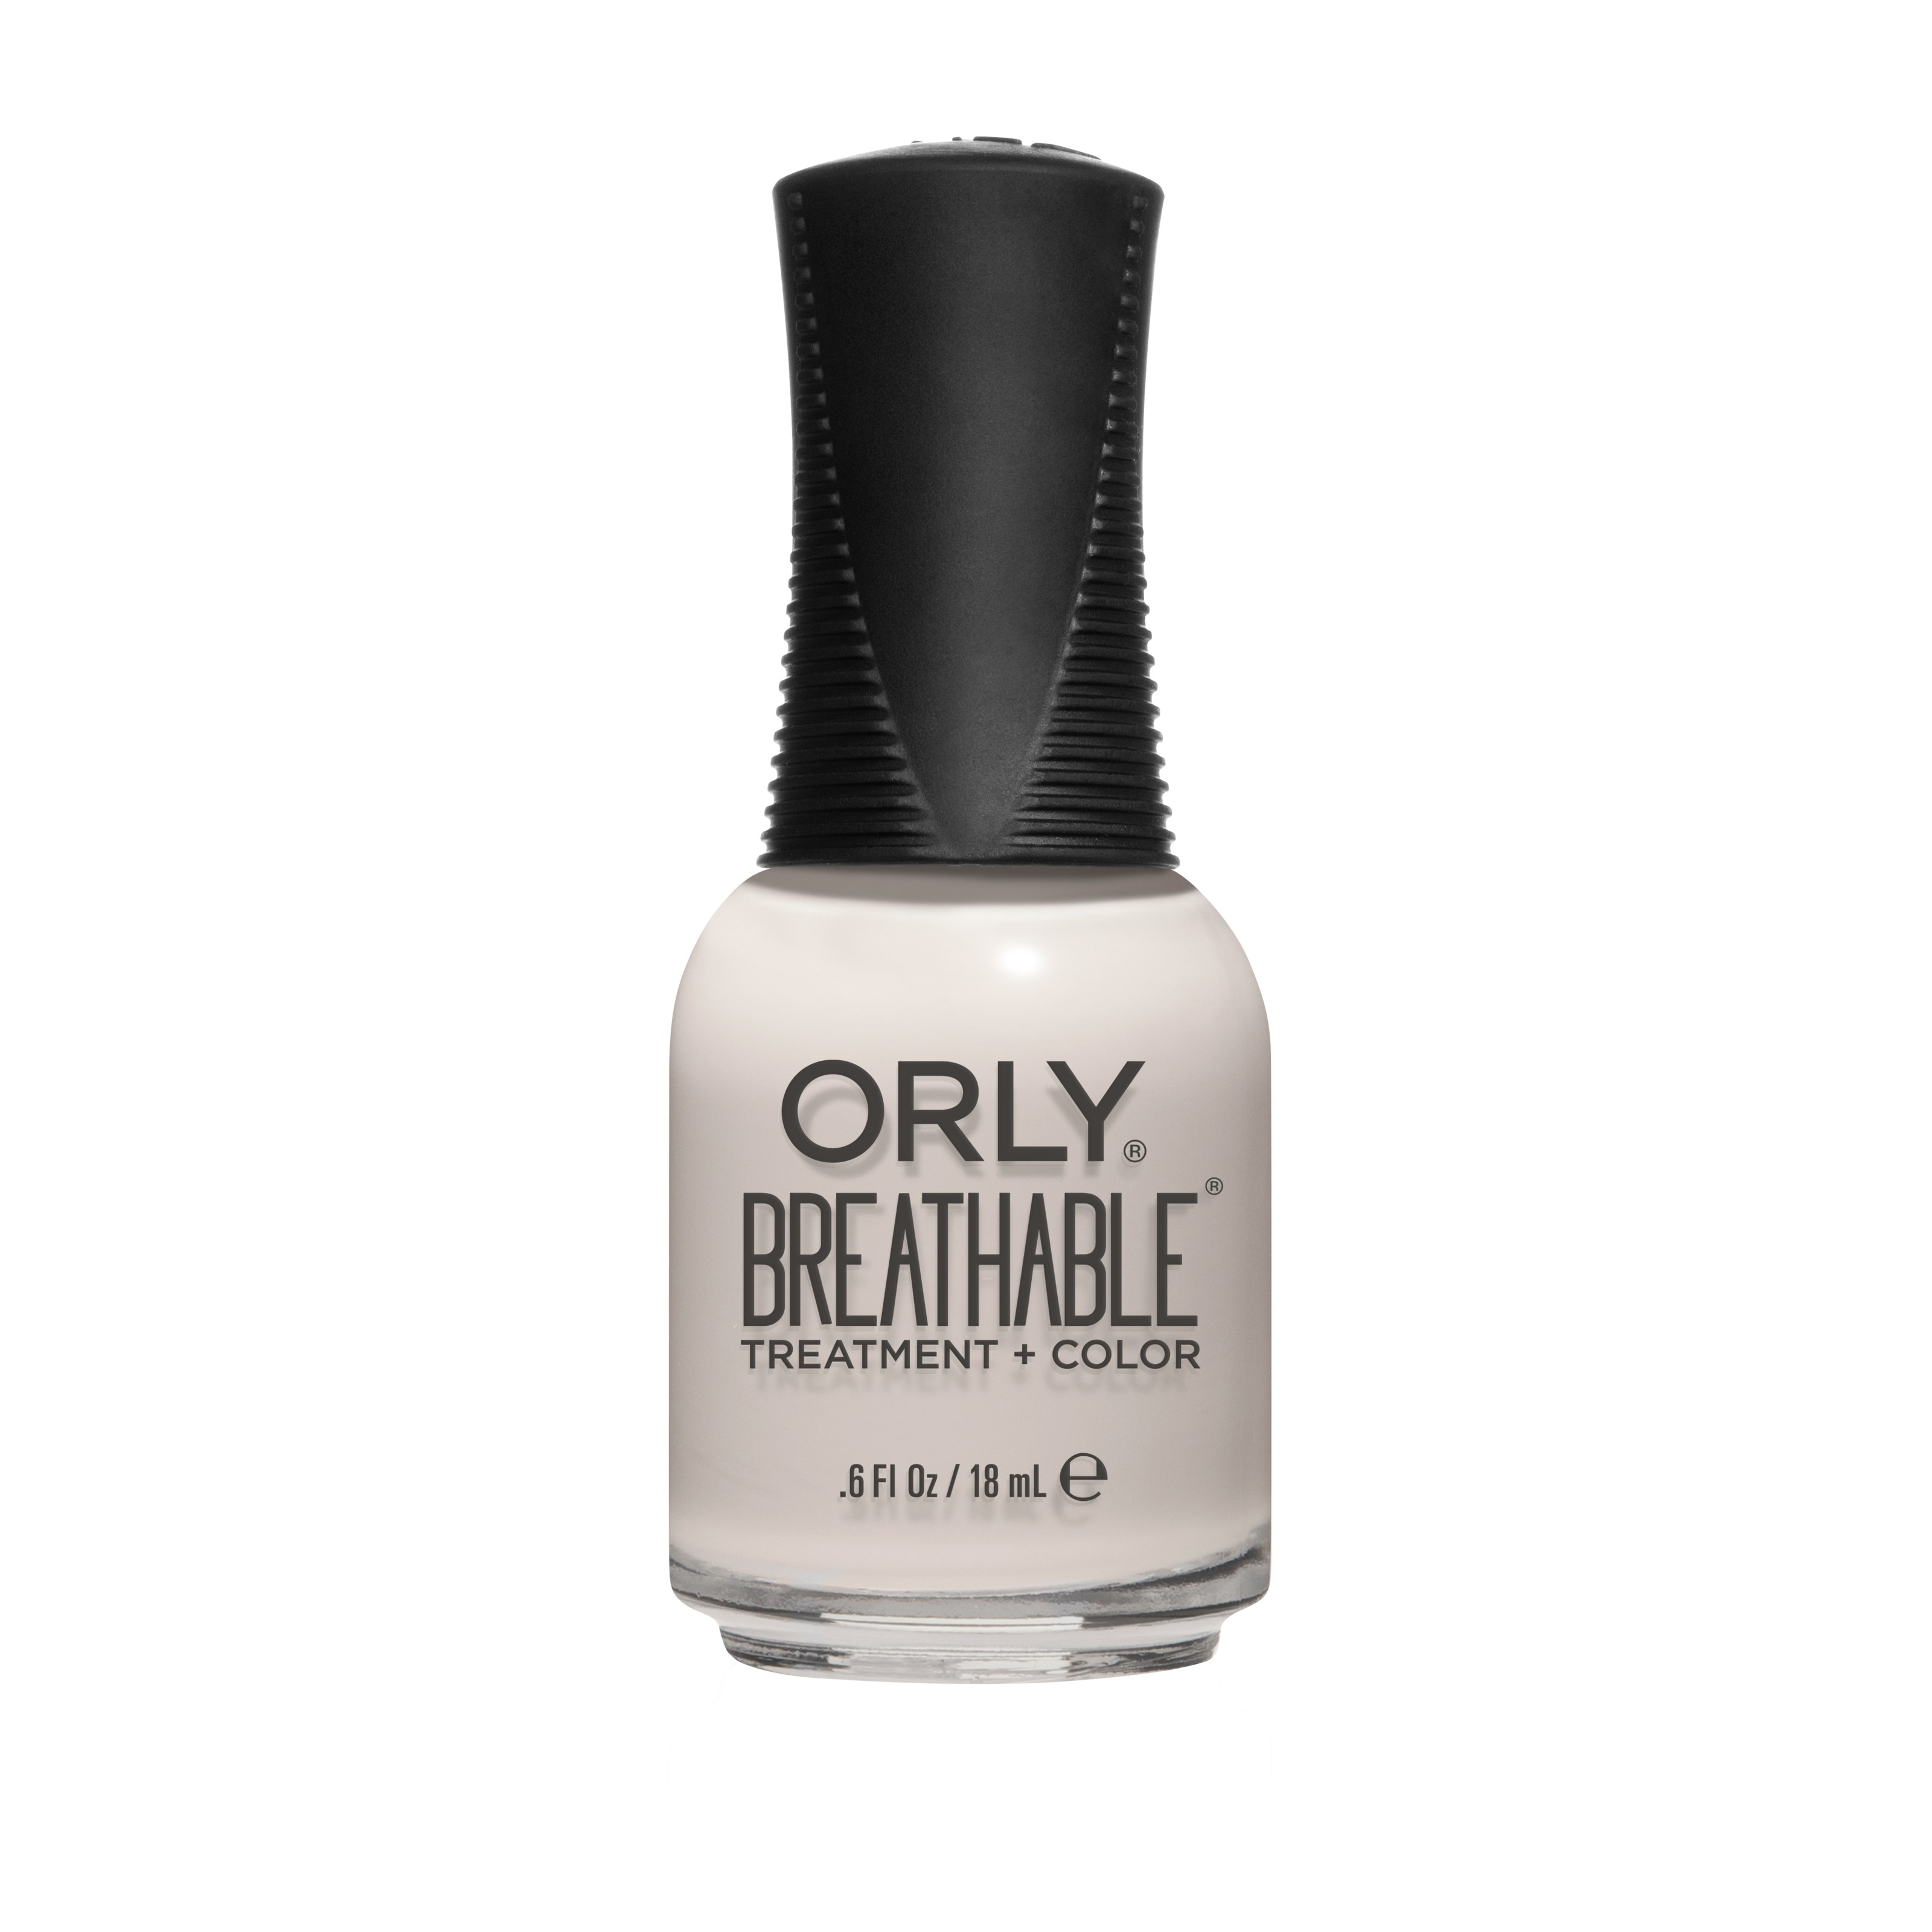 Läs mer om ORLY Breathable Barely There